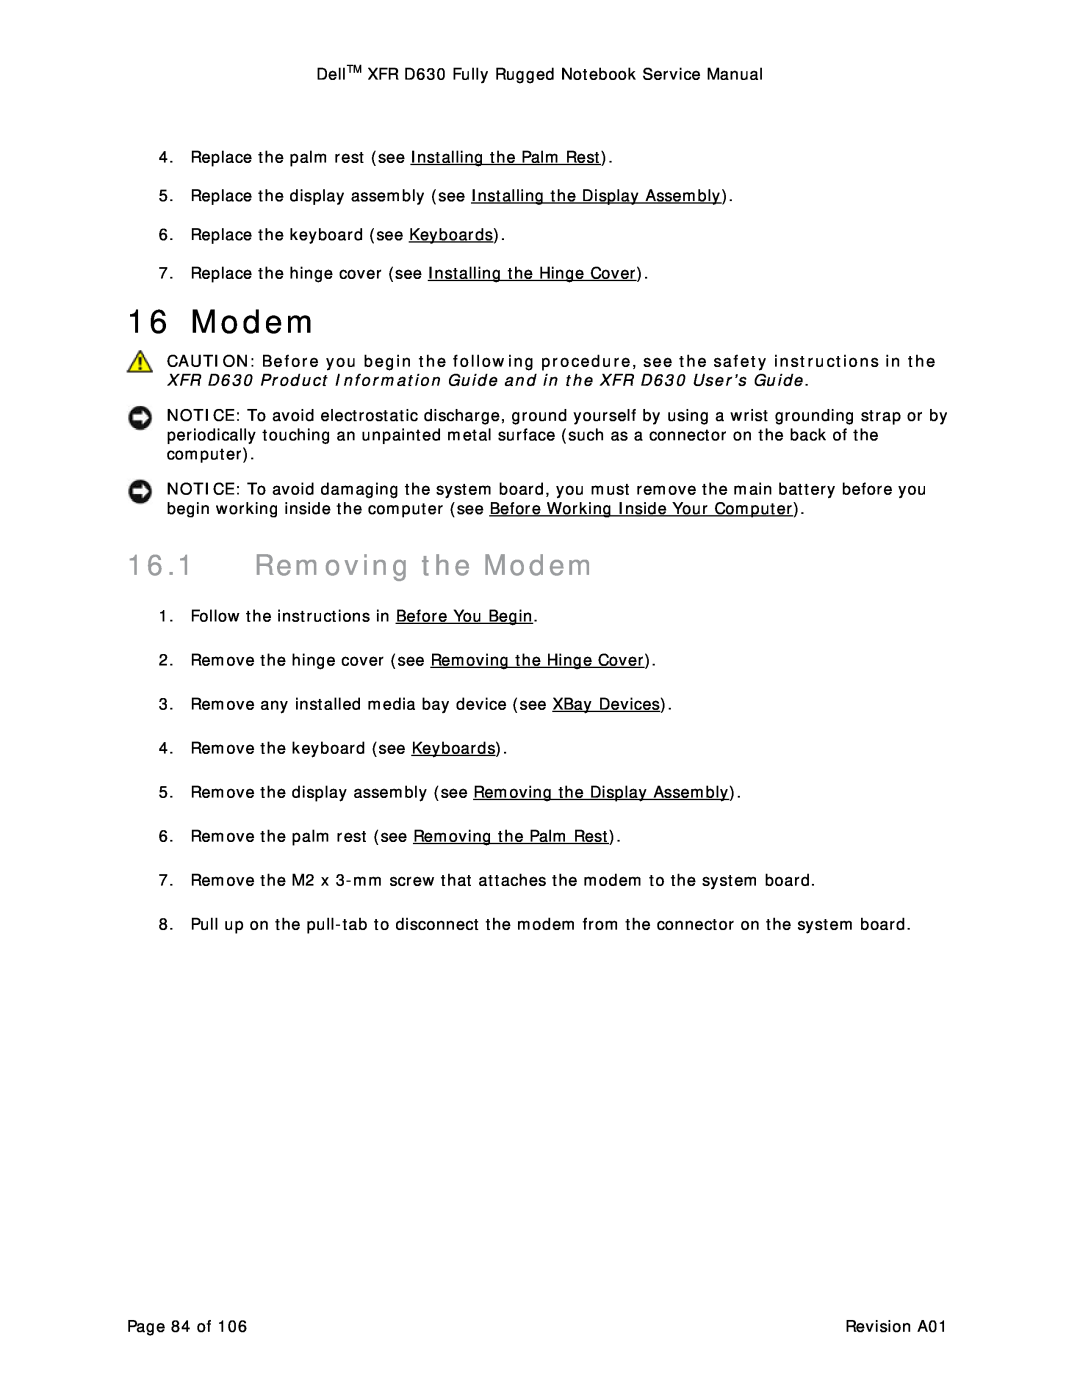 Dell D630 service manual Removing the Modem 